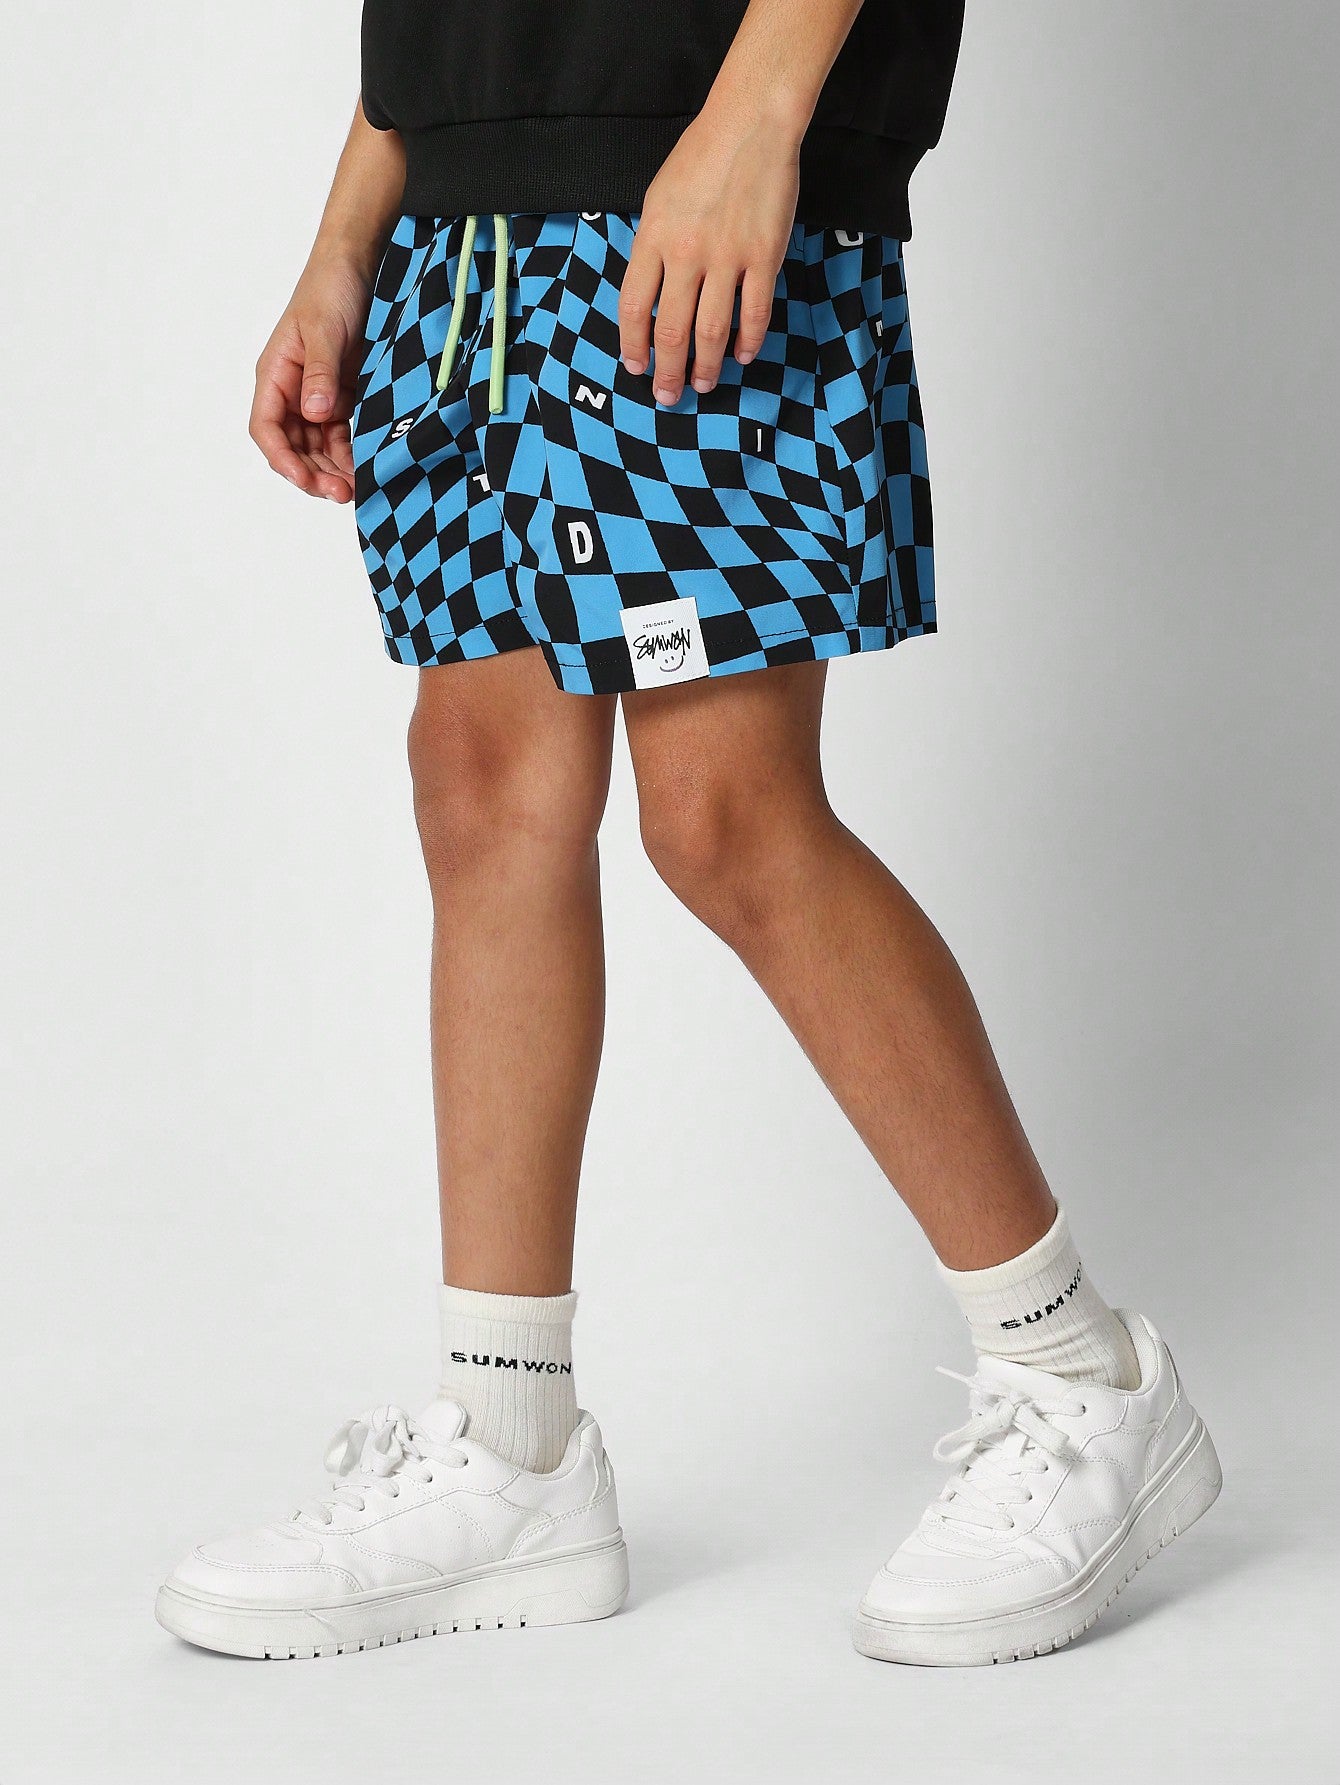 Tween Girls Shorts With All Over Print Back To School